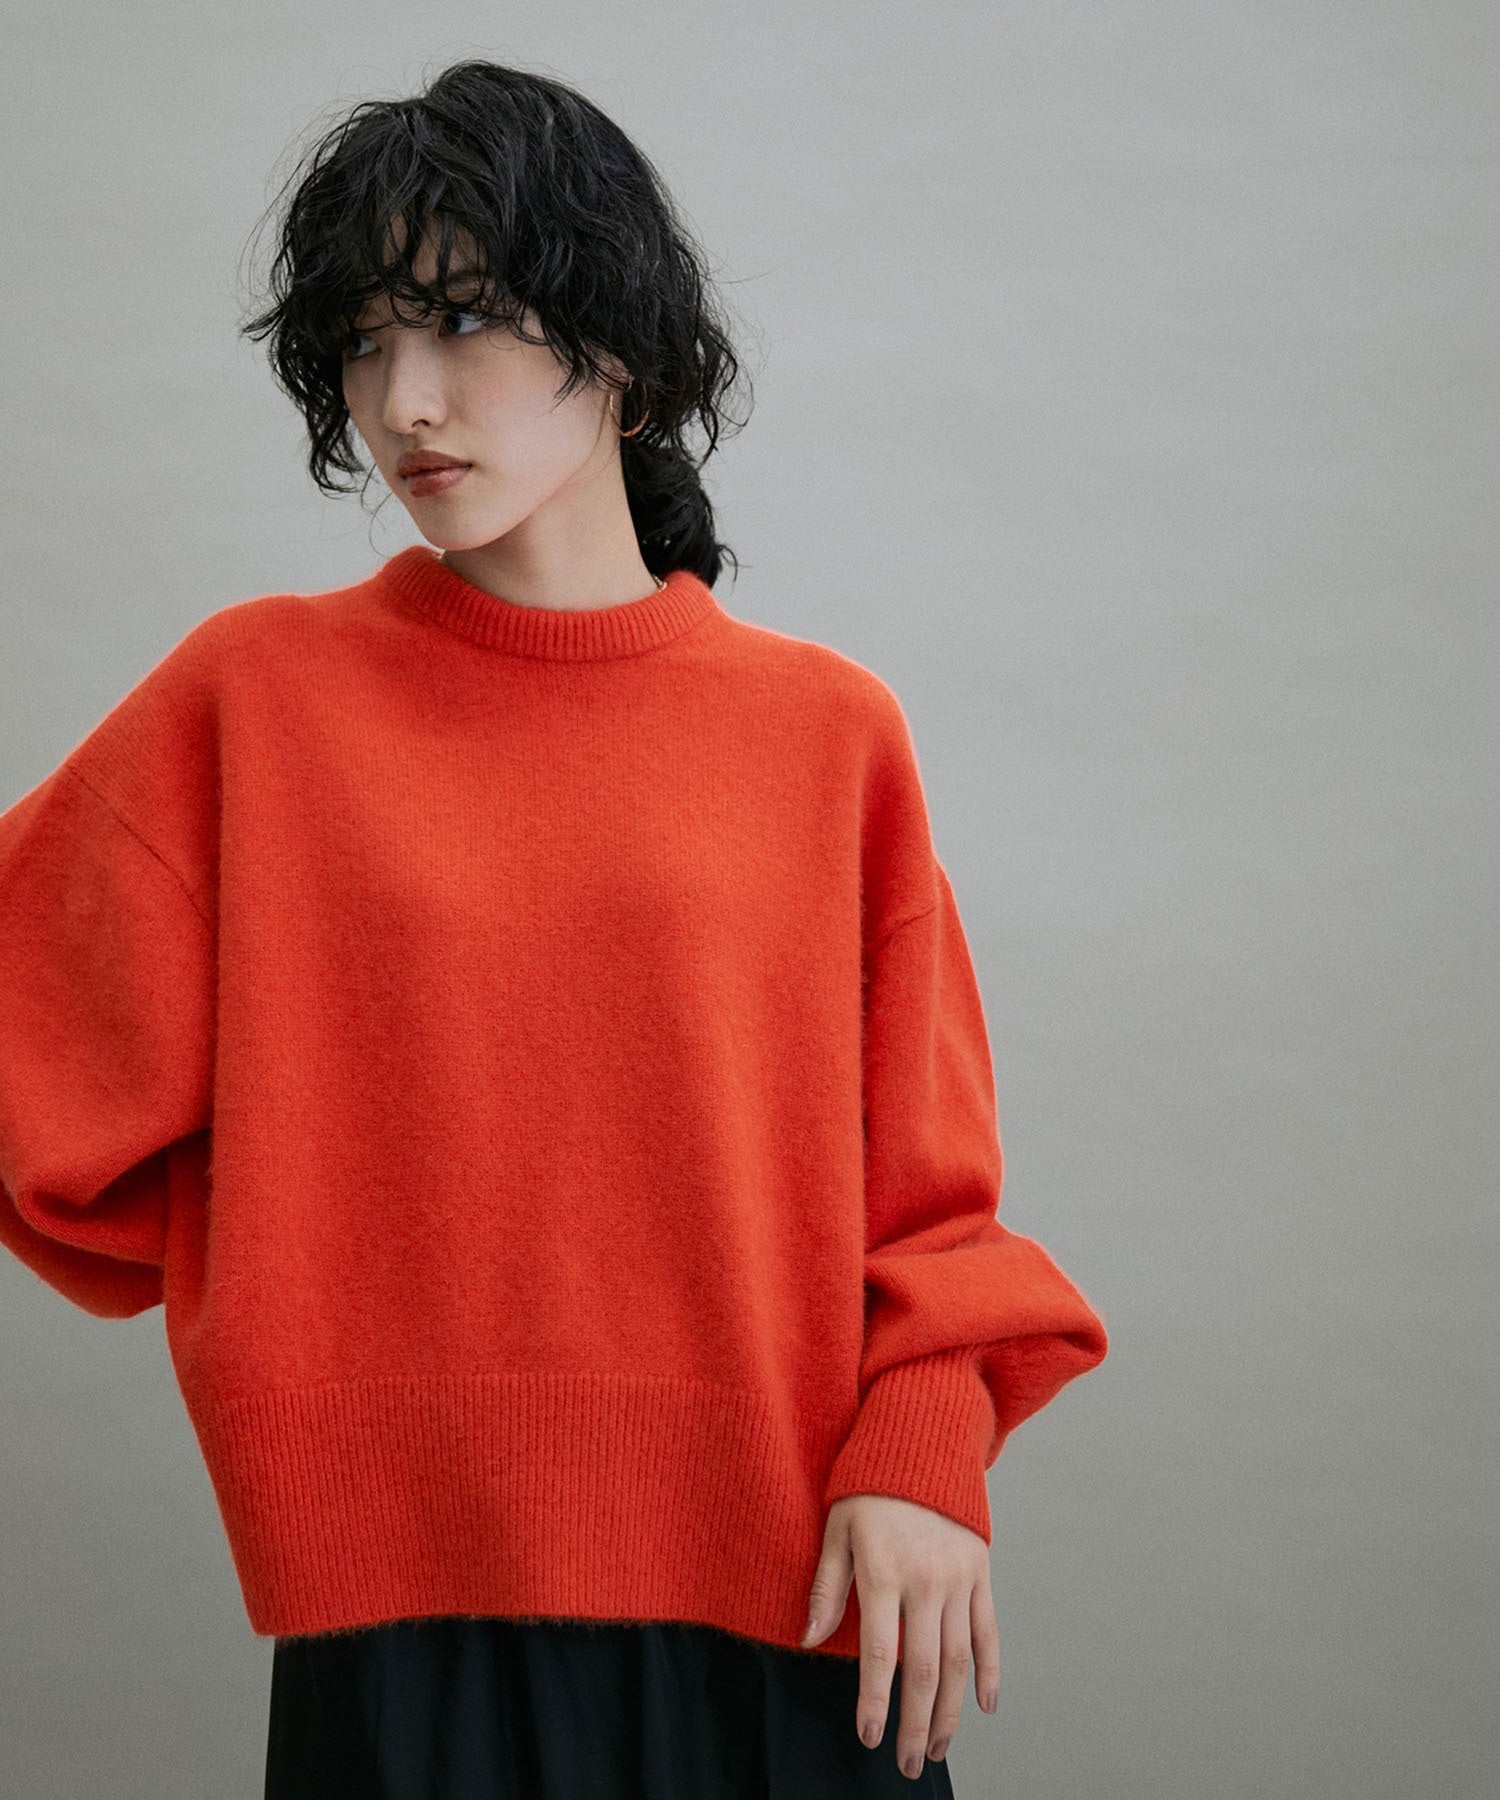 WEB LIMITED】AER｜2022AW KNIT COLLECTION | J'aDoRe JUN ONLINE